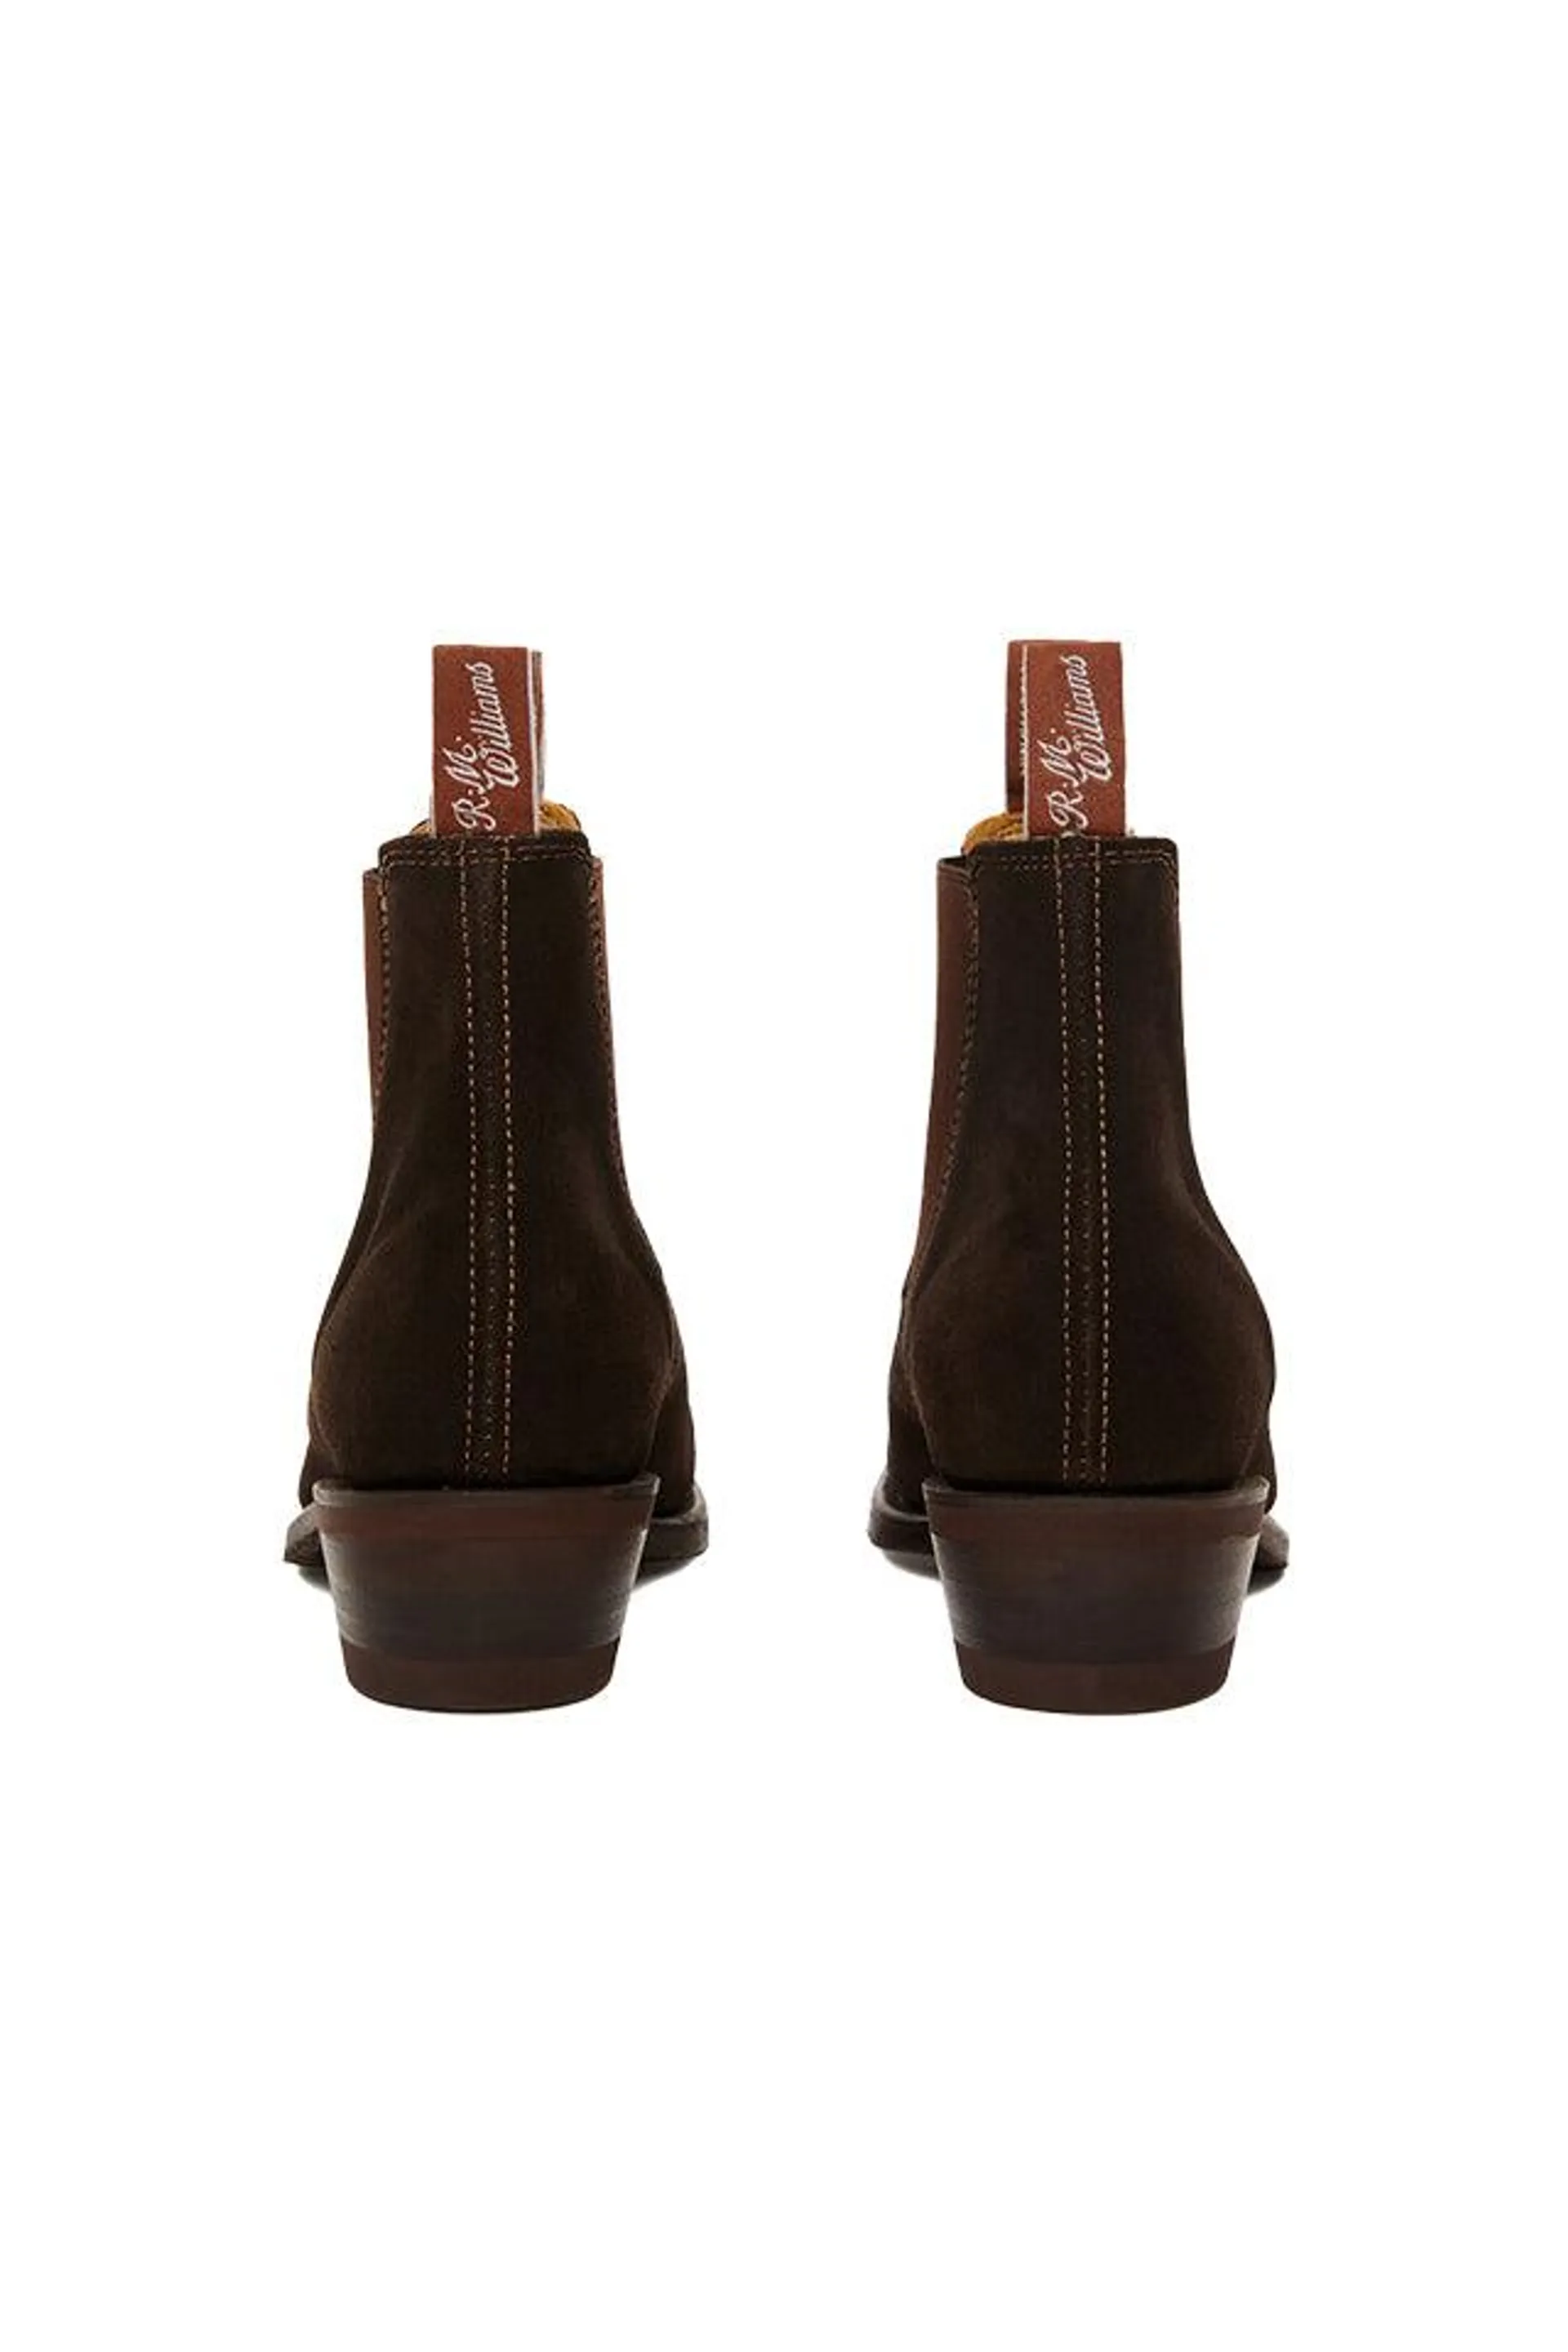 Lady Yearling Suede Boot